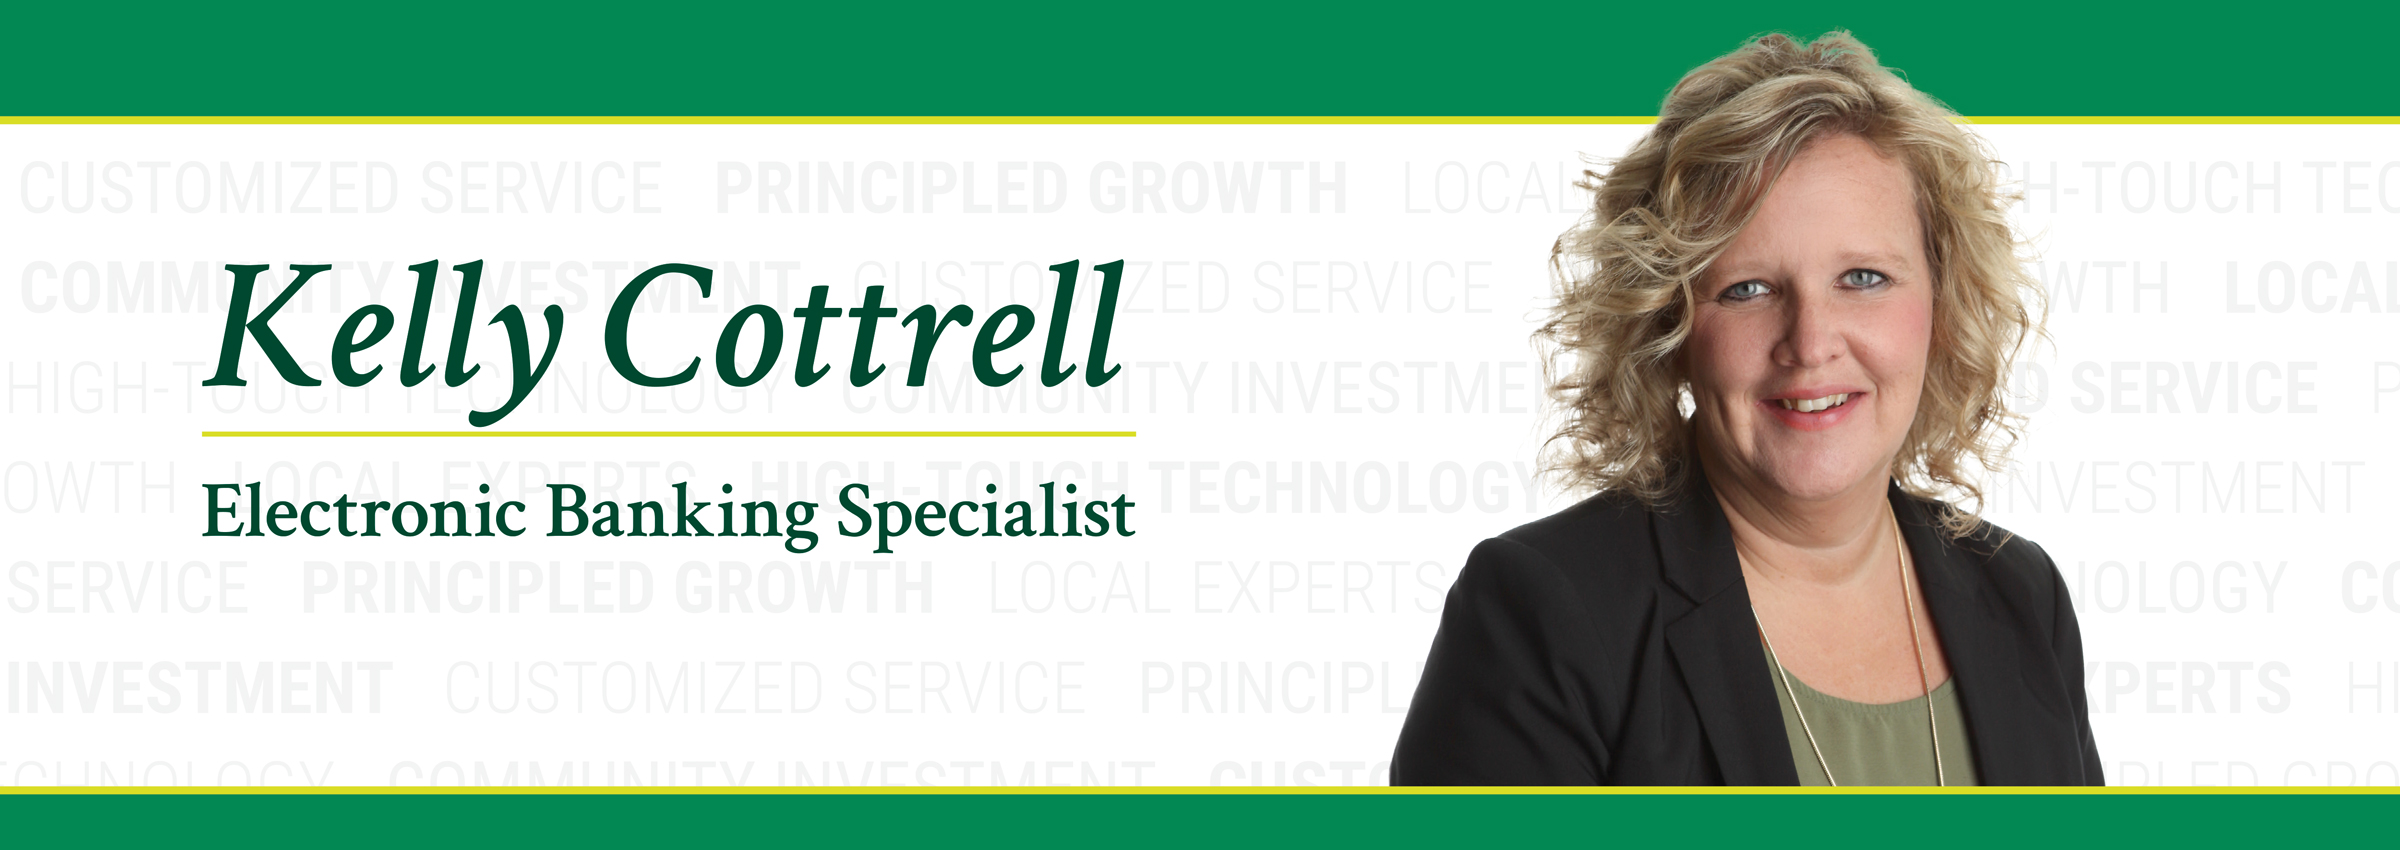 Kelly Cottrell Banner